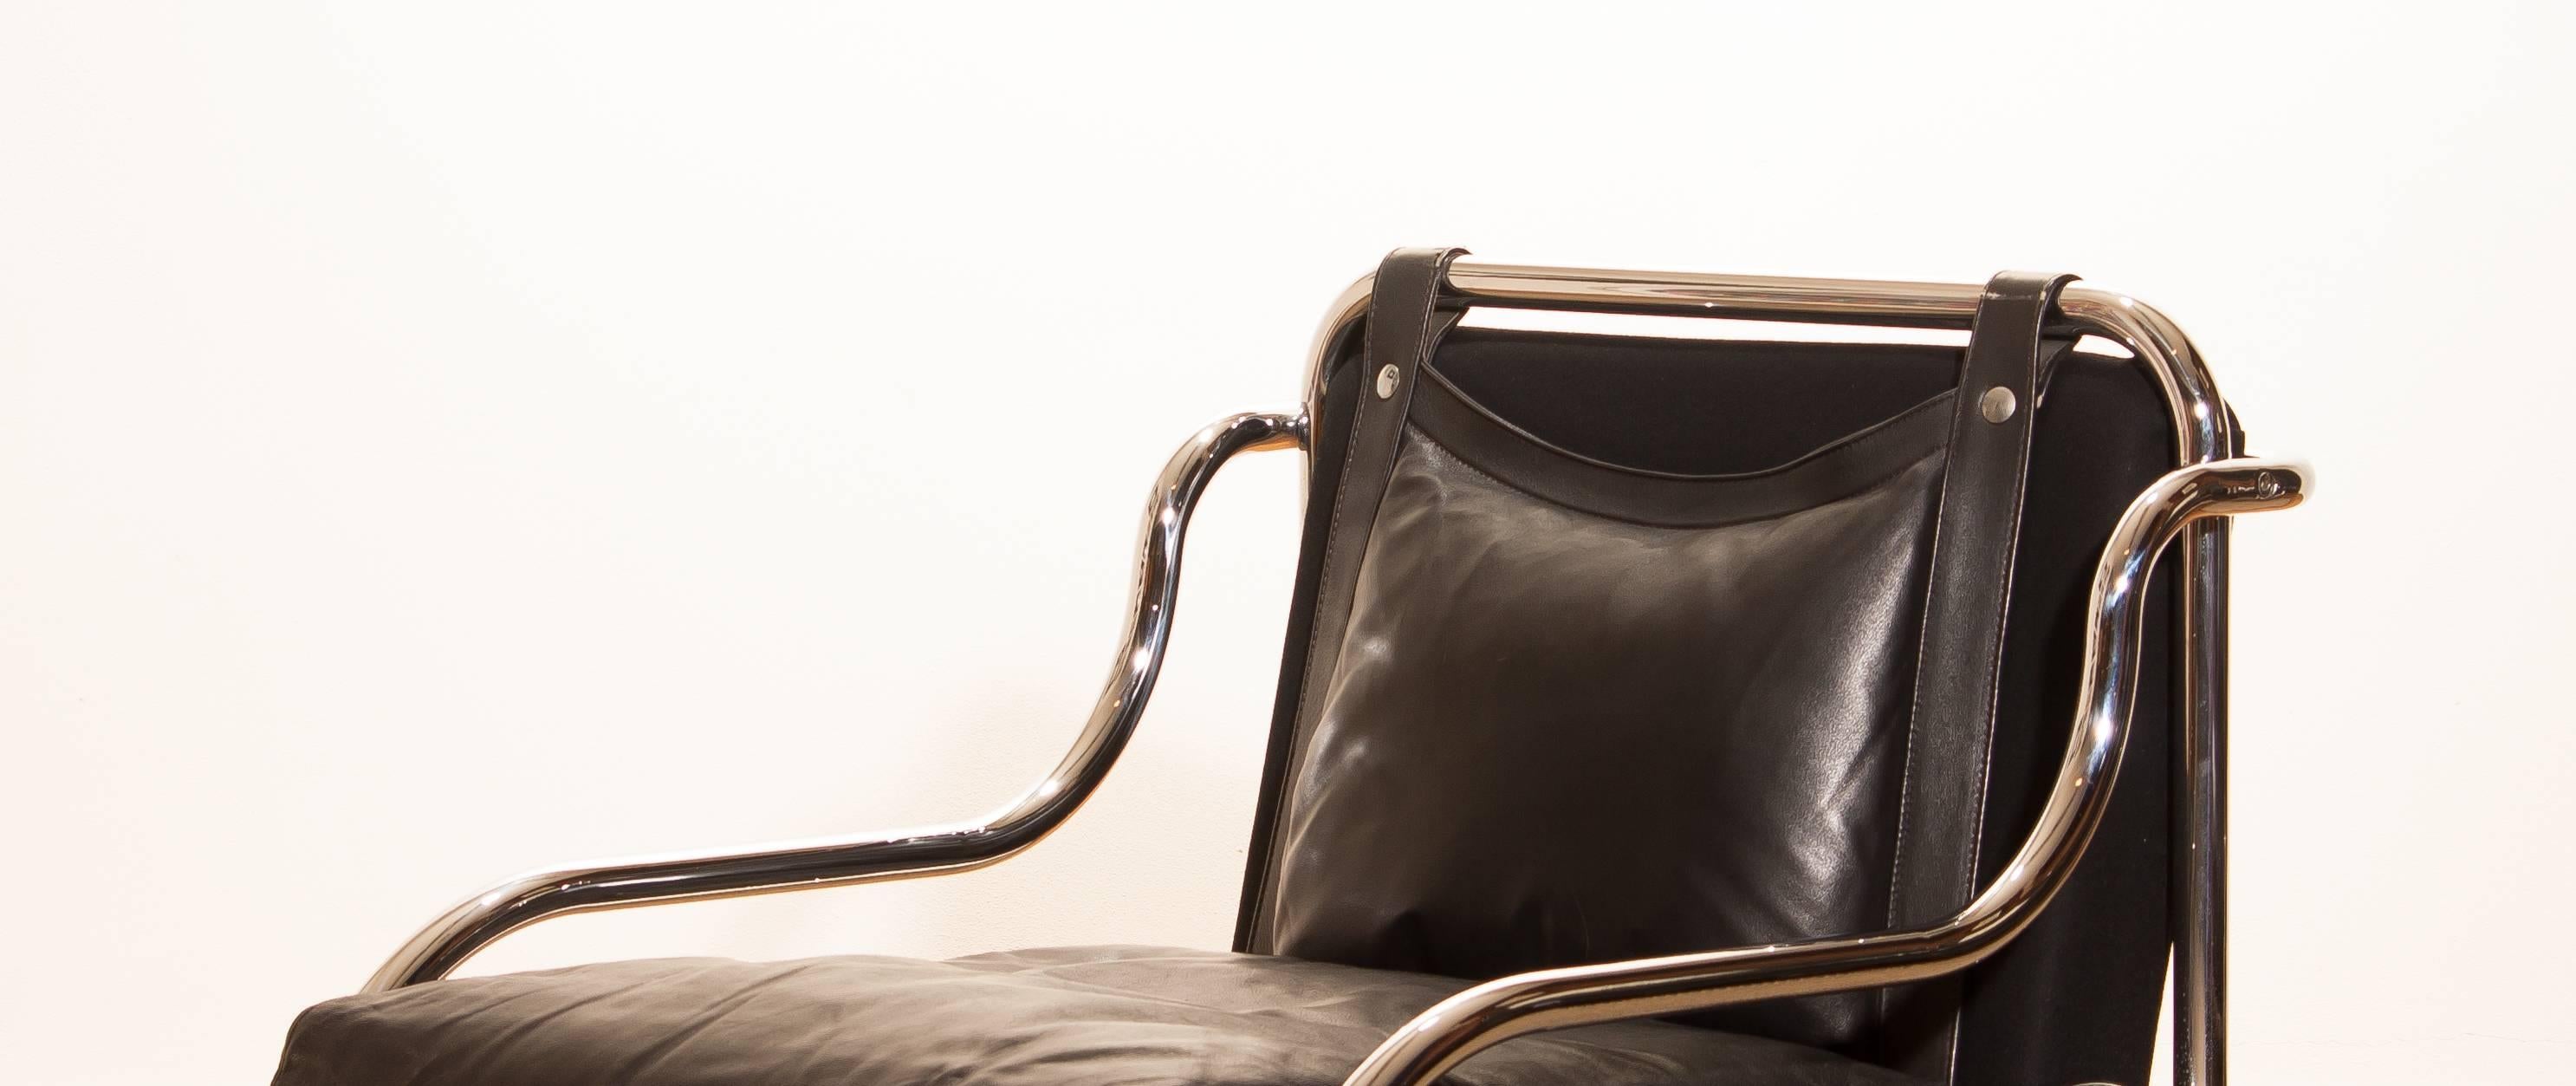 Mid-20th Century 1960s, Leather and Chrome Lounge Chair by Gae Aulenti for Poltronova